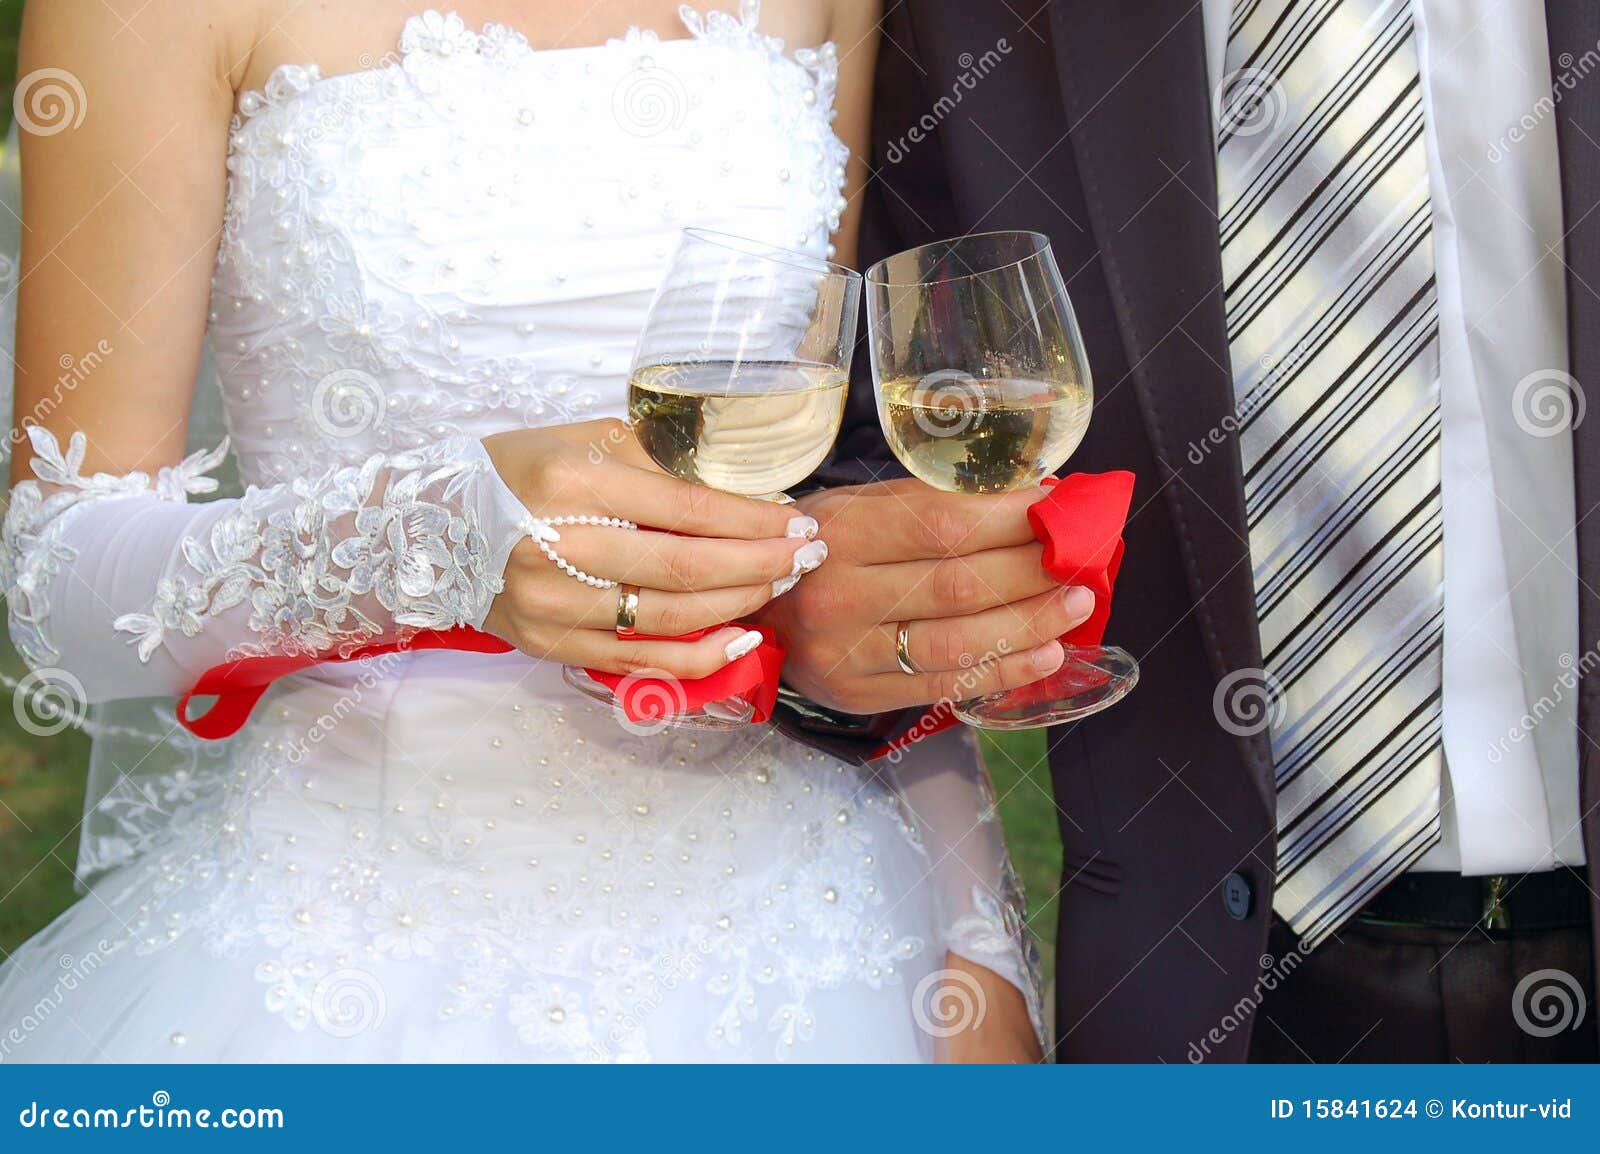 glasses in the hands of groom and fiancee